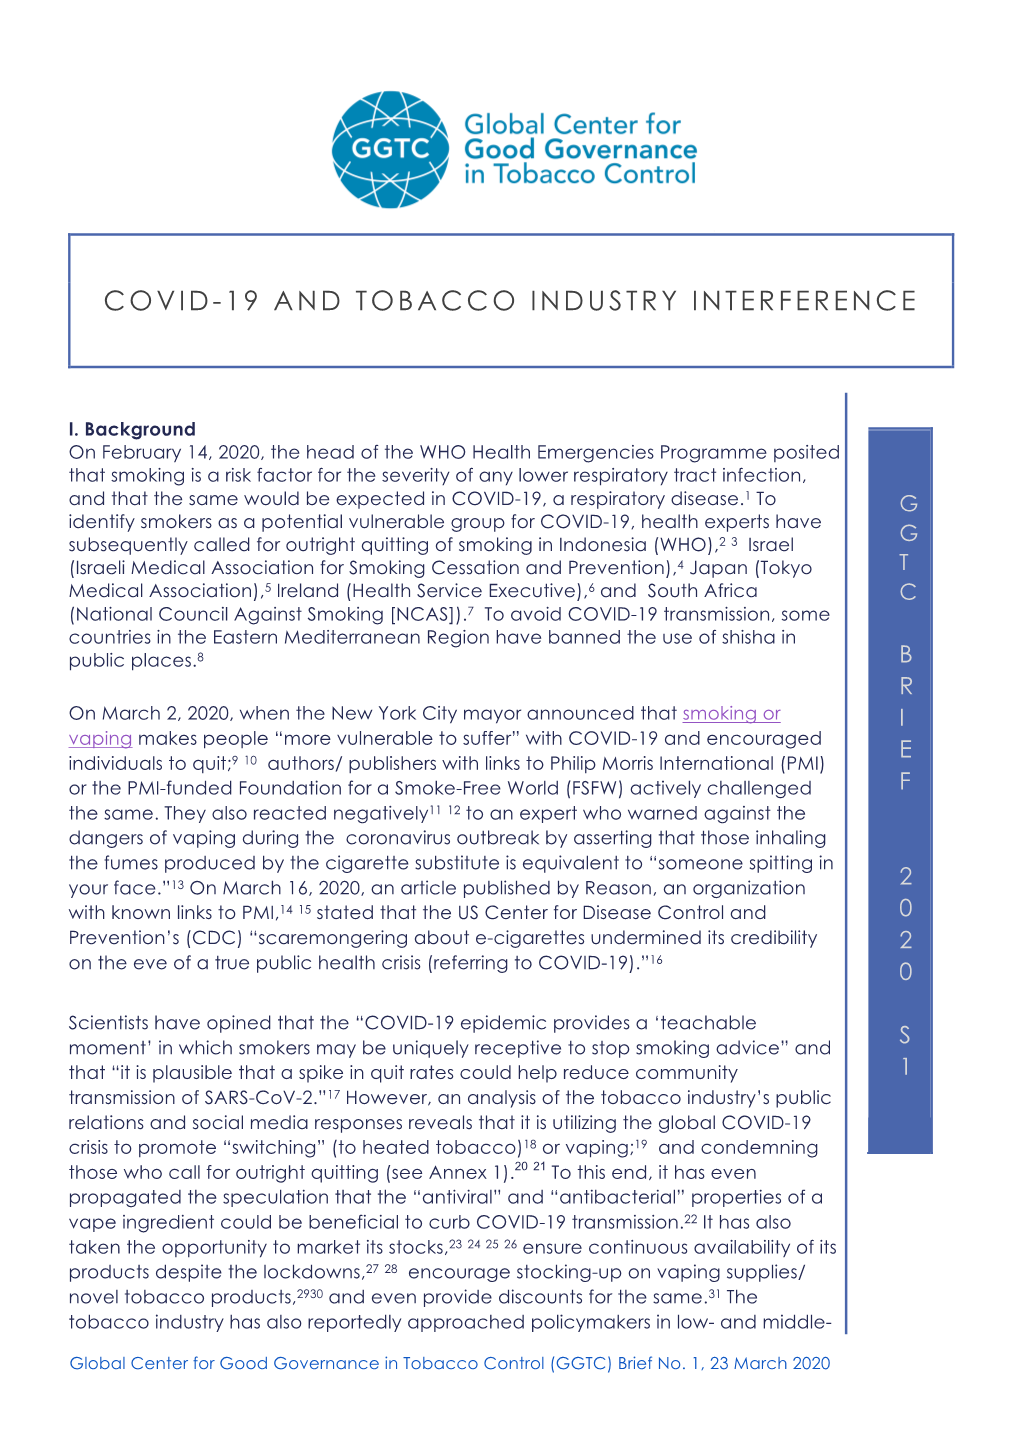 Covid-19 and Tobacco Industry Interference